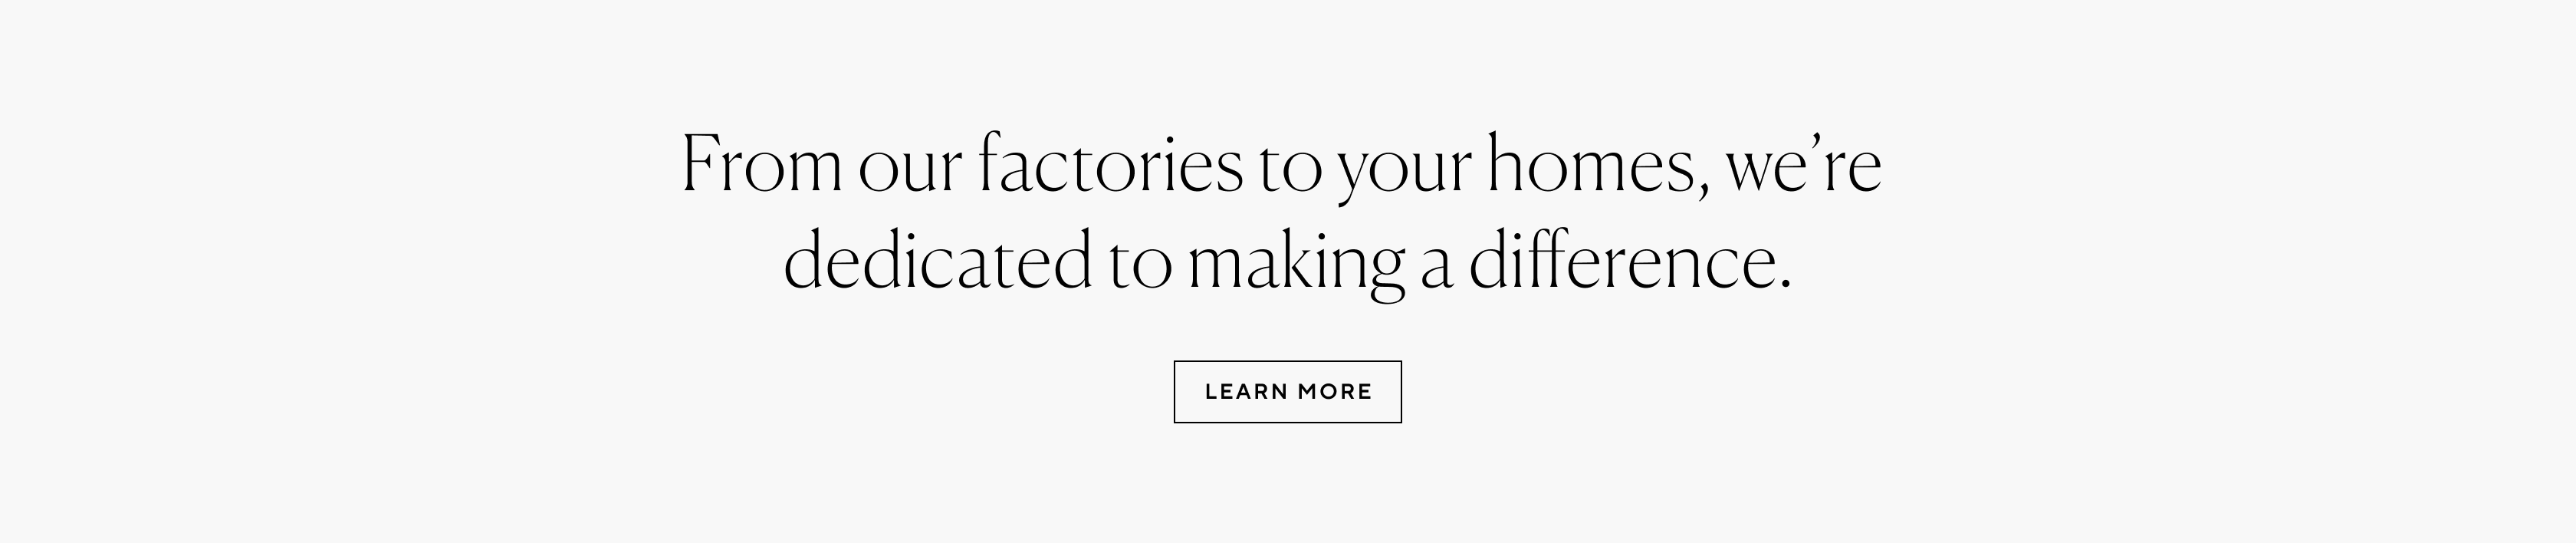 From our factories to your homes, we're dedicated to making a difference.